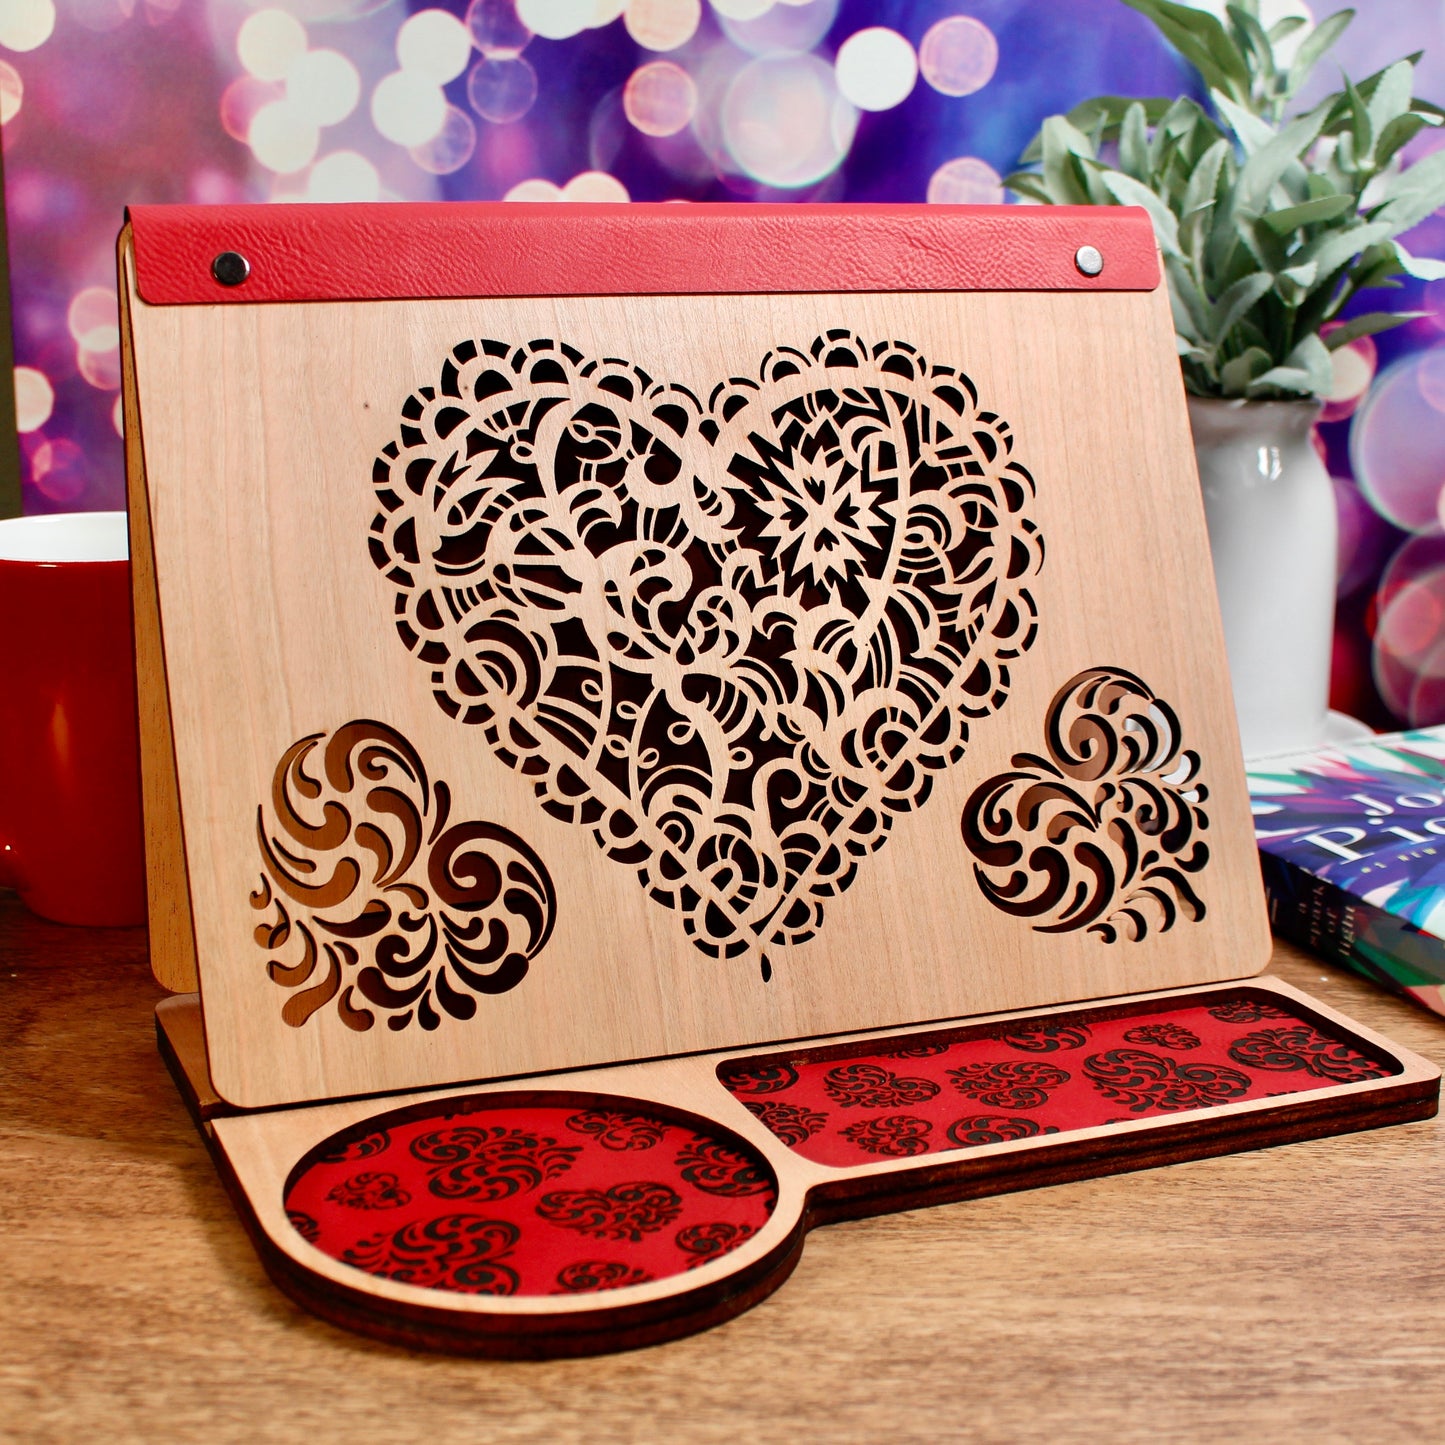 Book Rest and Page Holder - Wooden Book Valet with Hearts